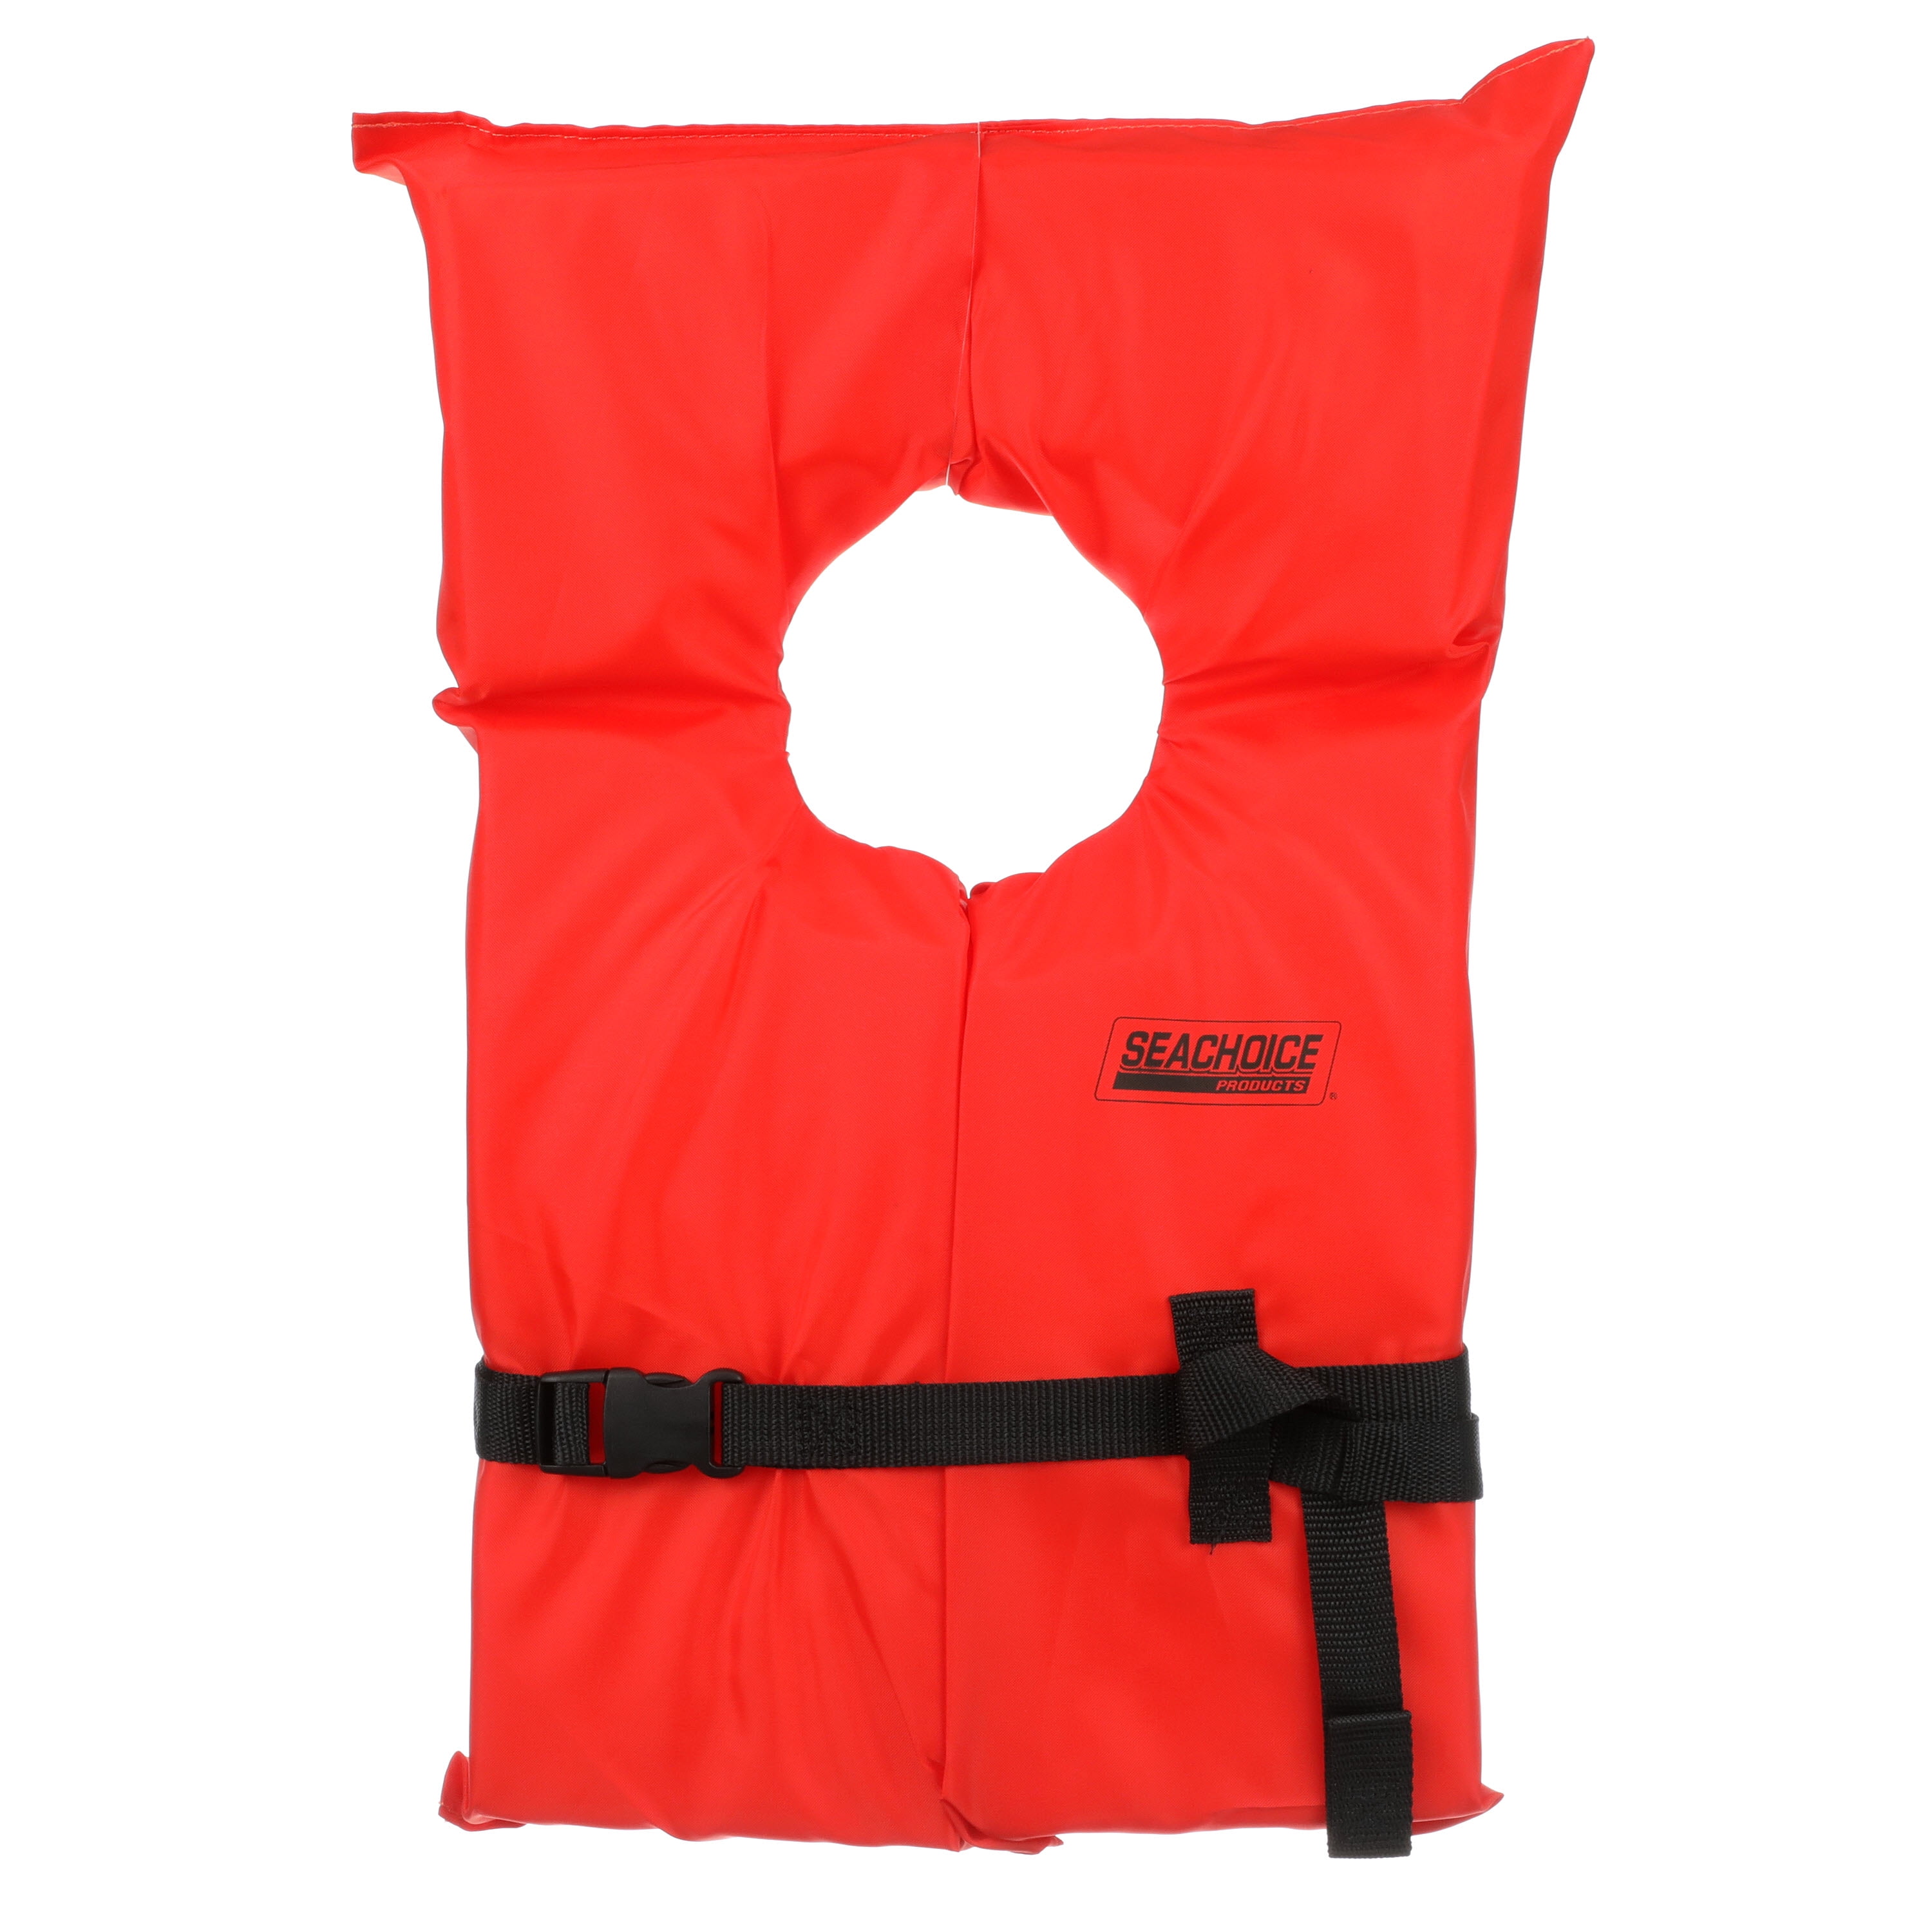 Orange Adult Life Jacket Coleman Stearns Type II US Coast Guard-approved Durable